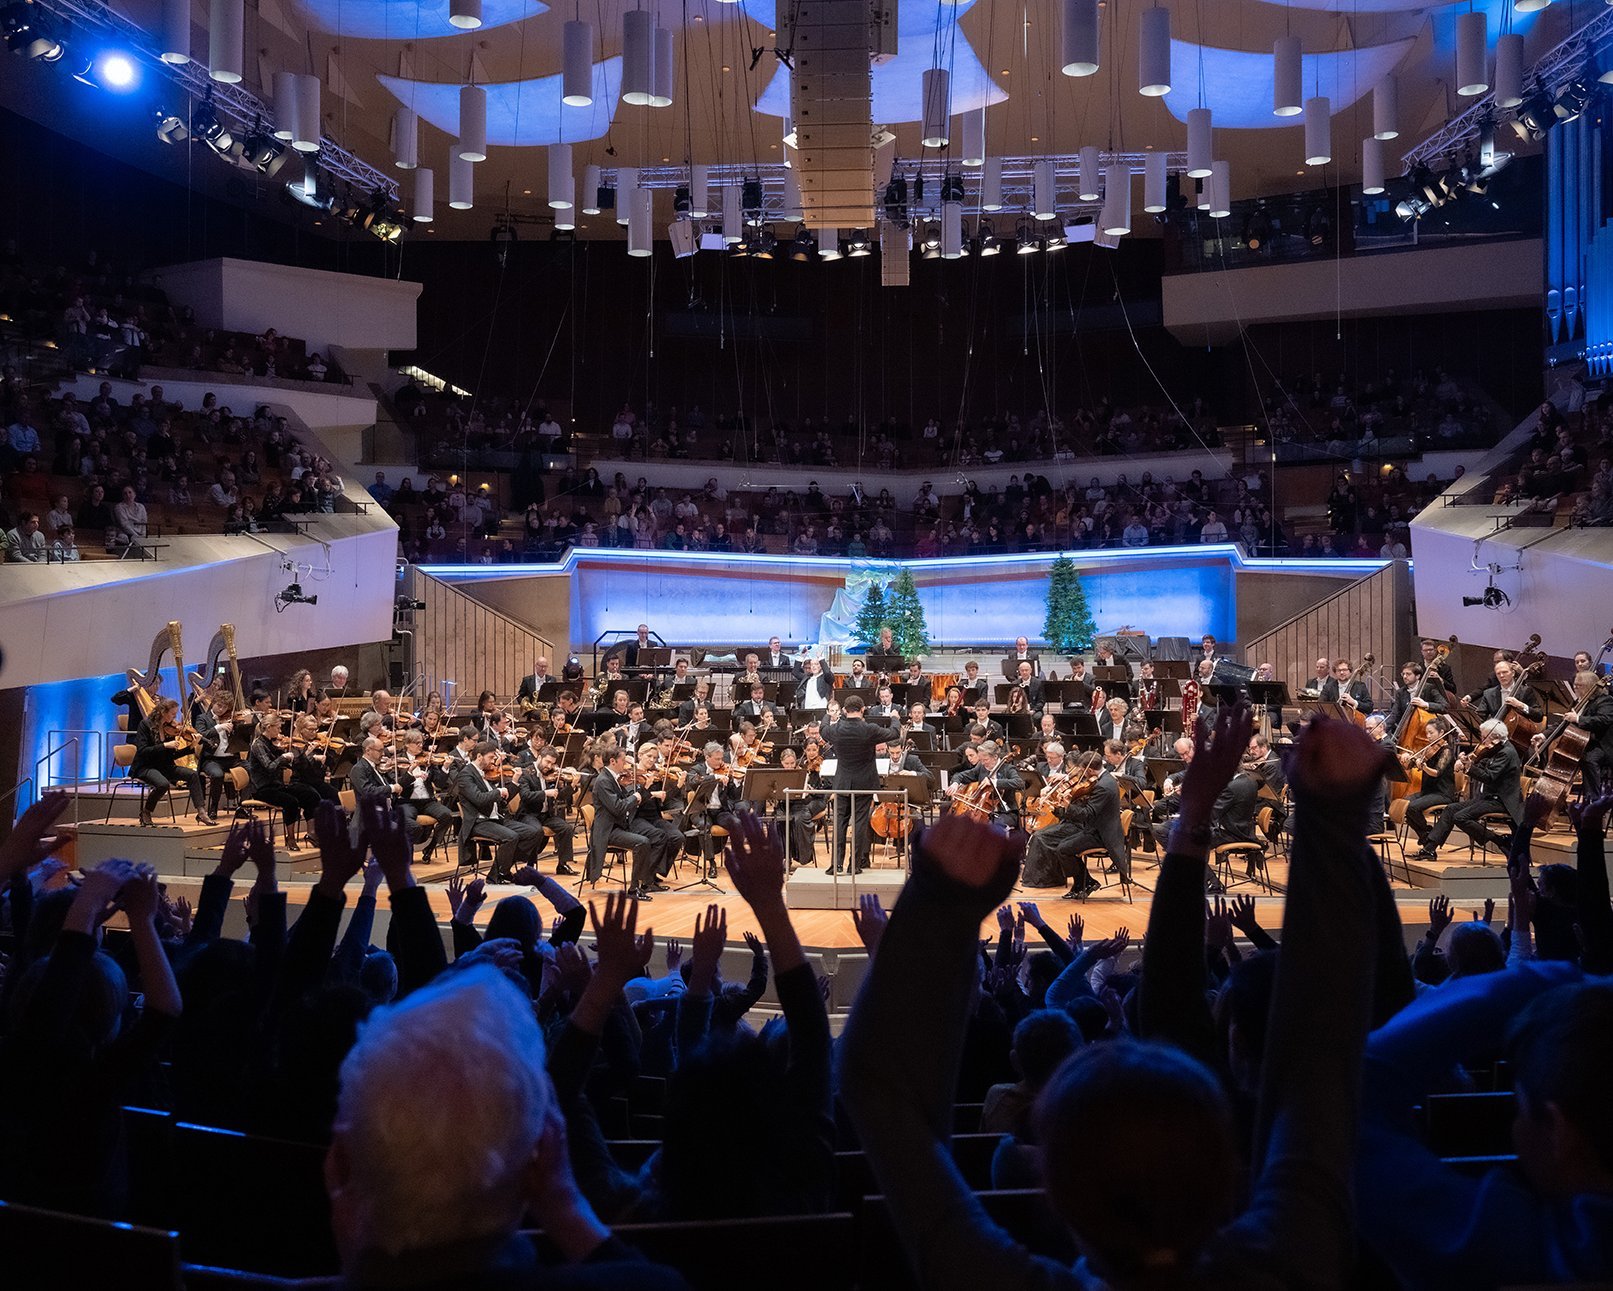 View of the stage of the Philharmonie Berlin, audience in the foreground